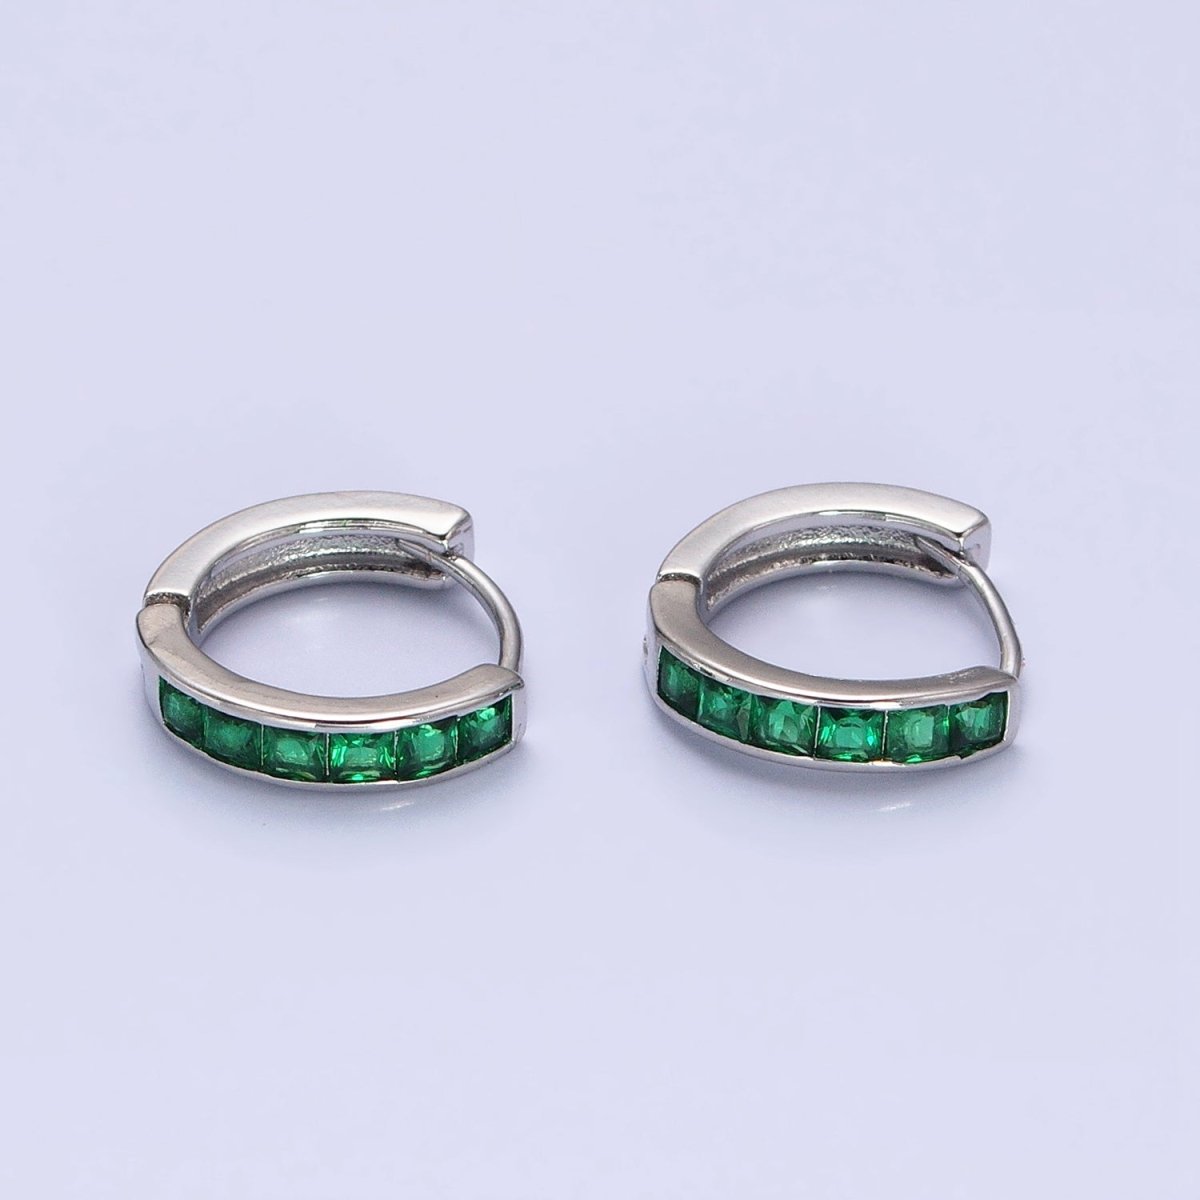 16K Gold Filled Green, Clear, Turquoise Square CZ Lined 13mm Cartilage Huggie Earrings in Gold & Silver | AB659 AB958 - AB960 AB1502 AB1503 - DLUXCA